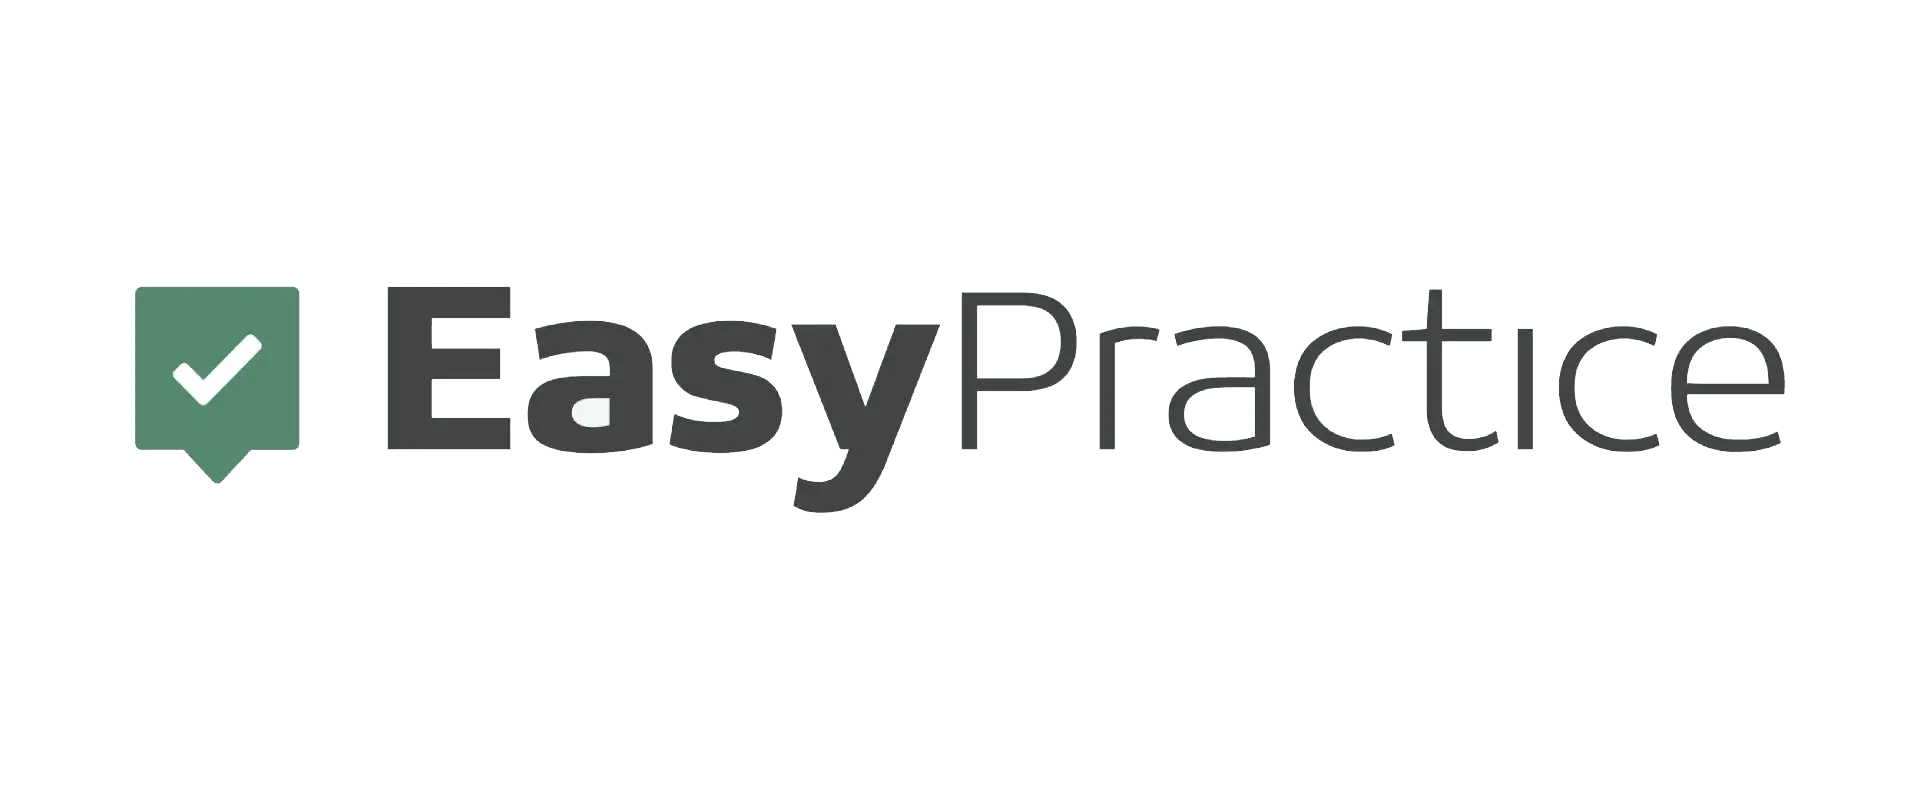 Co-Founder, EasyPractice ApS